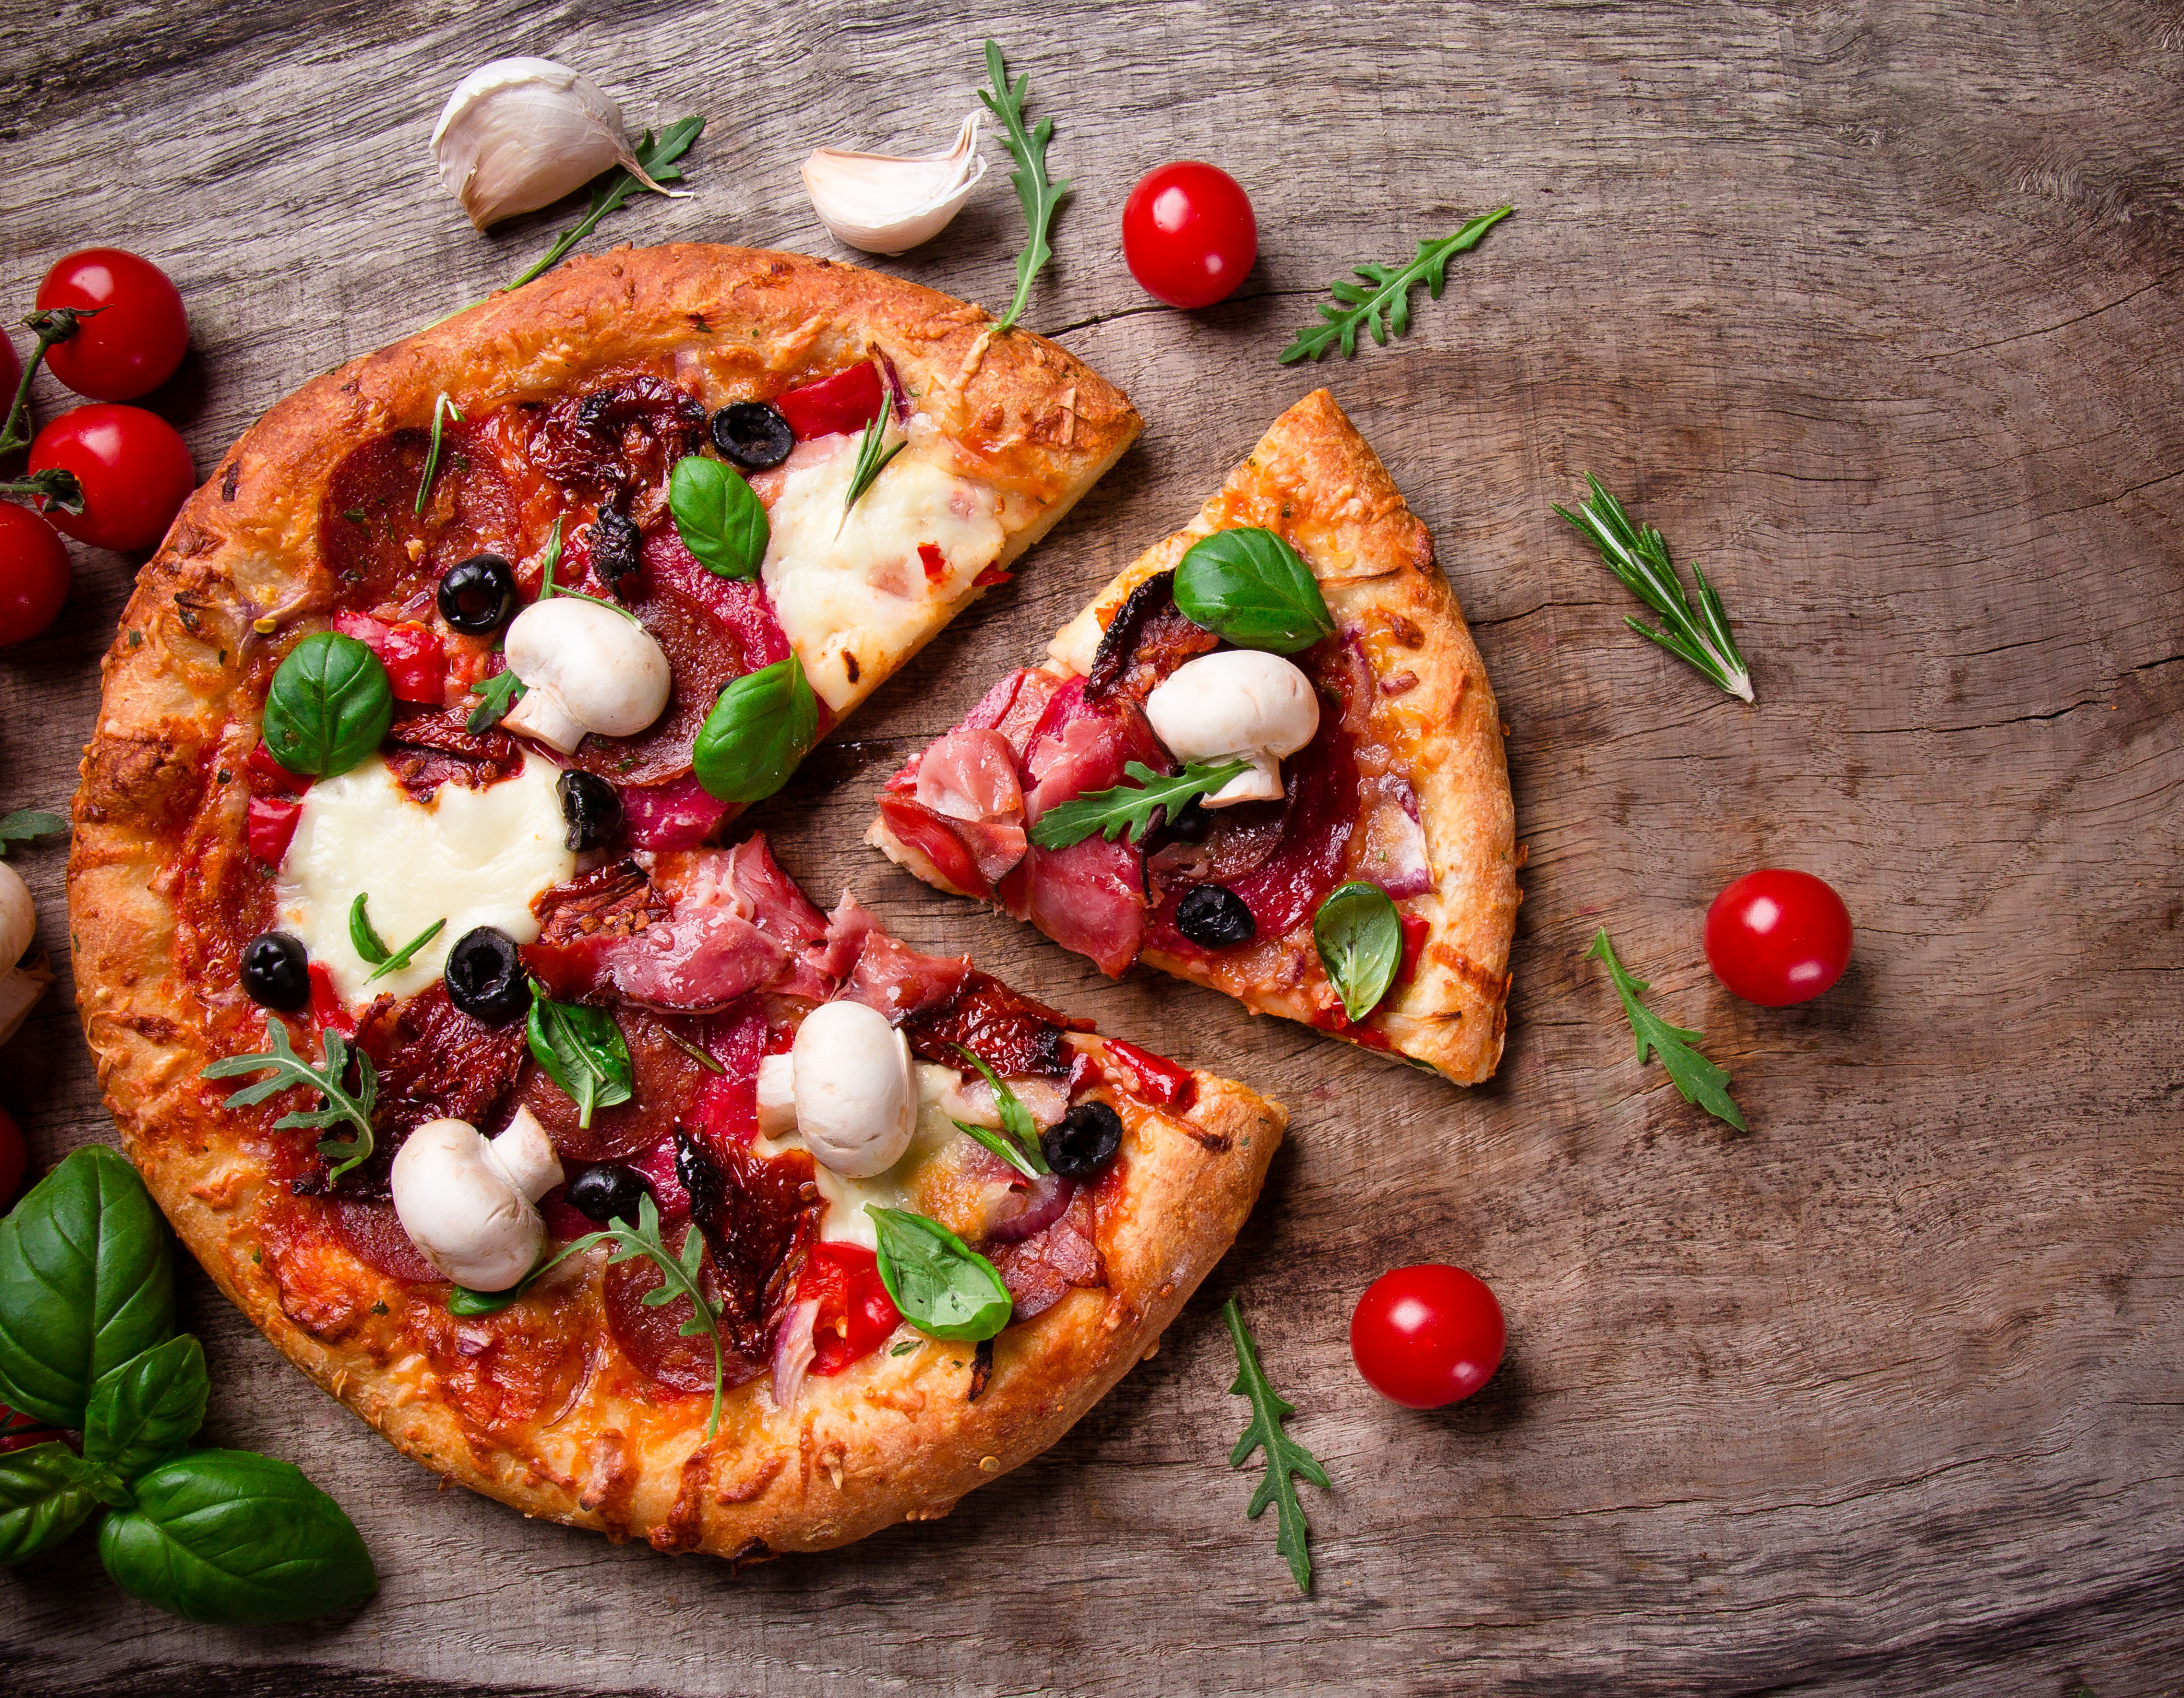 Italian Pizza with salami, mozzarella and olives for lunch or dinner